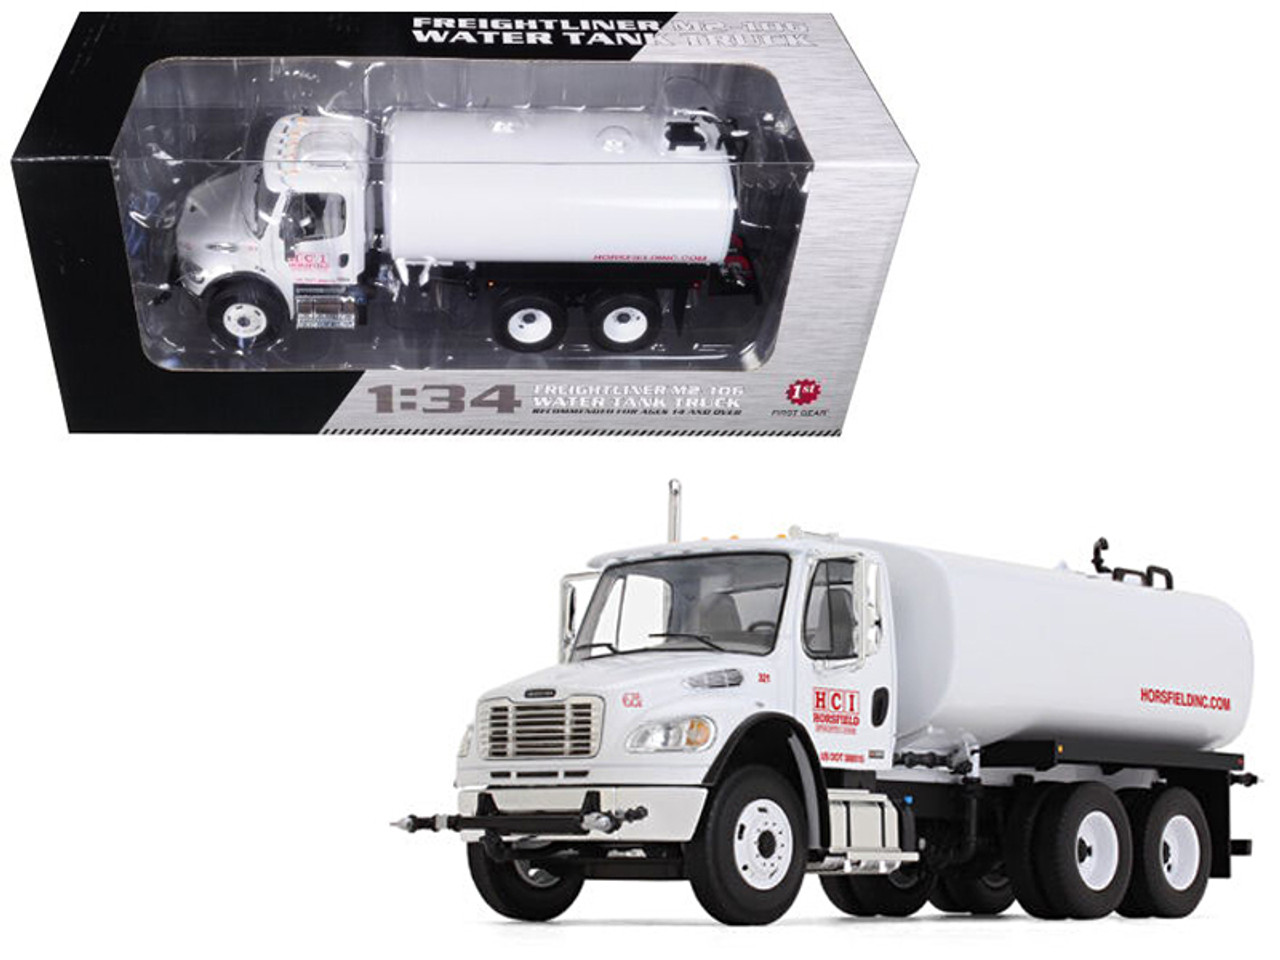 Freightliner M2-106 Water Tank Truck Horsfield Construction (HCI) 1/34 Diecast Model by First Gear